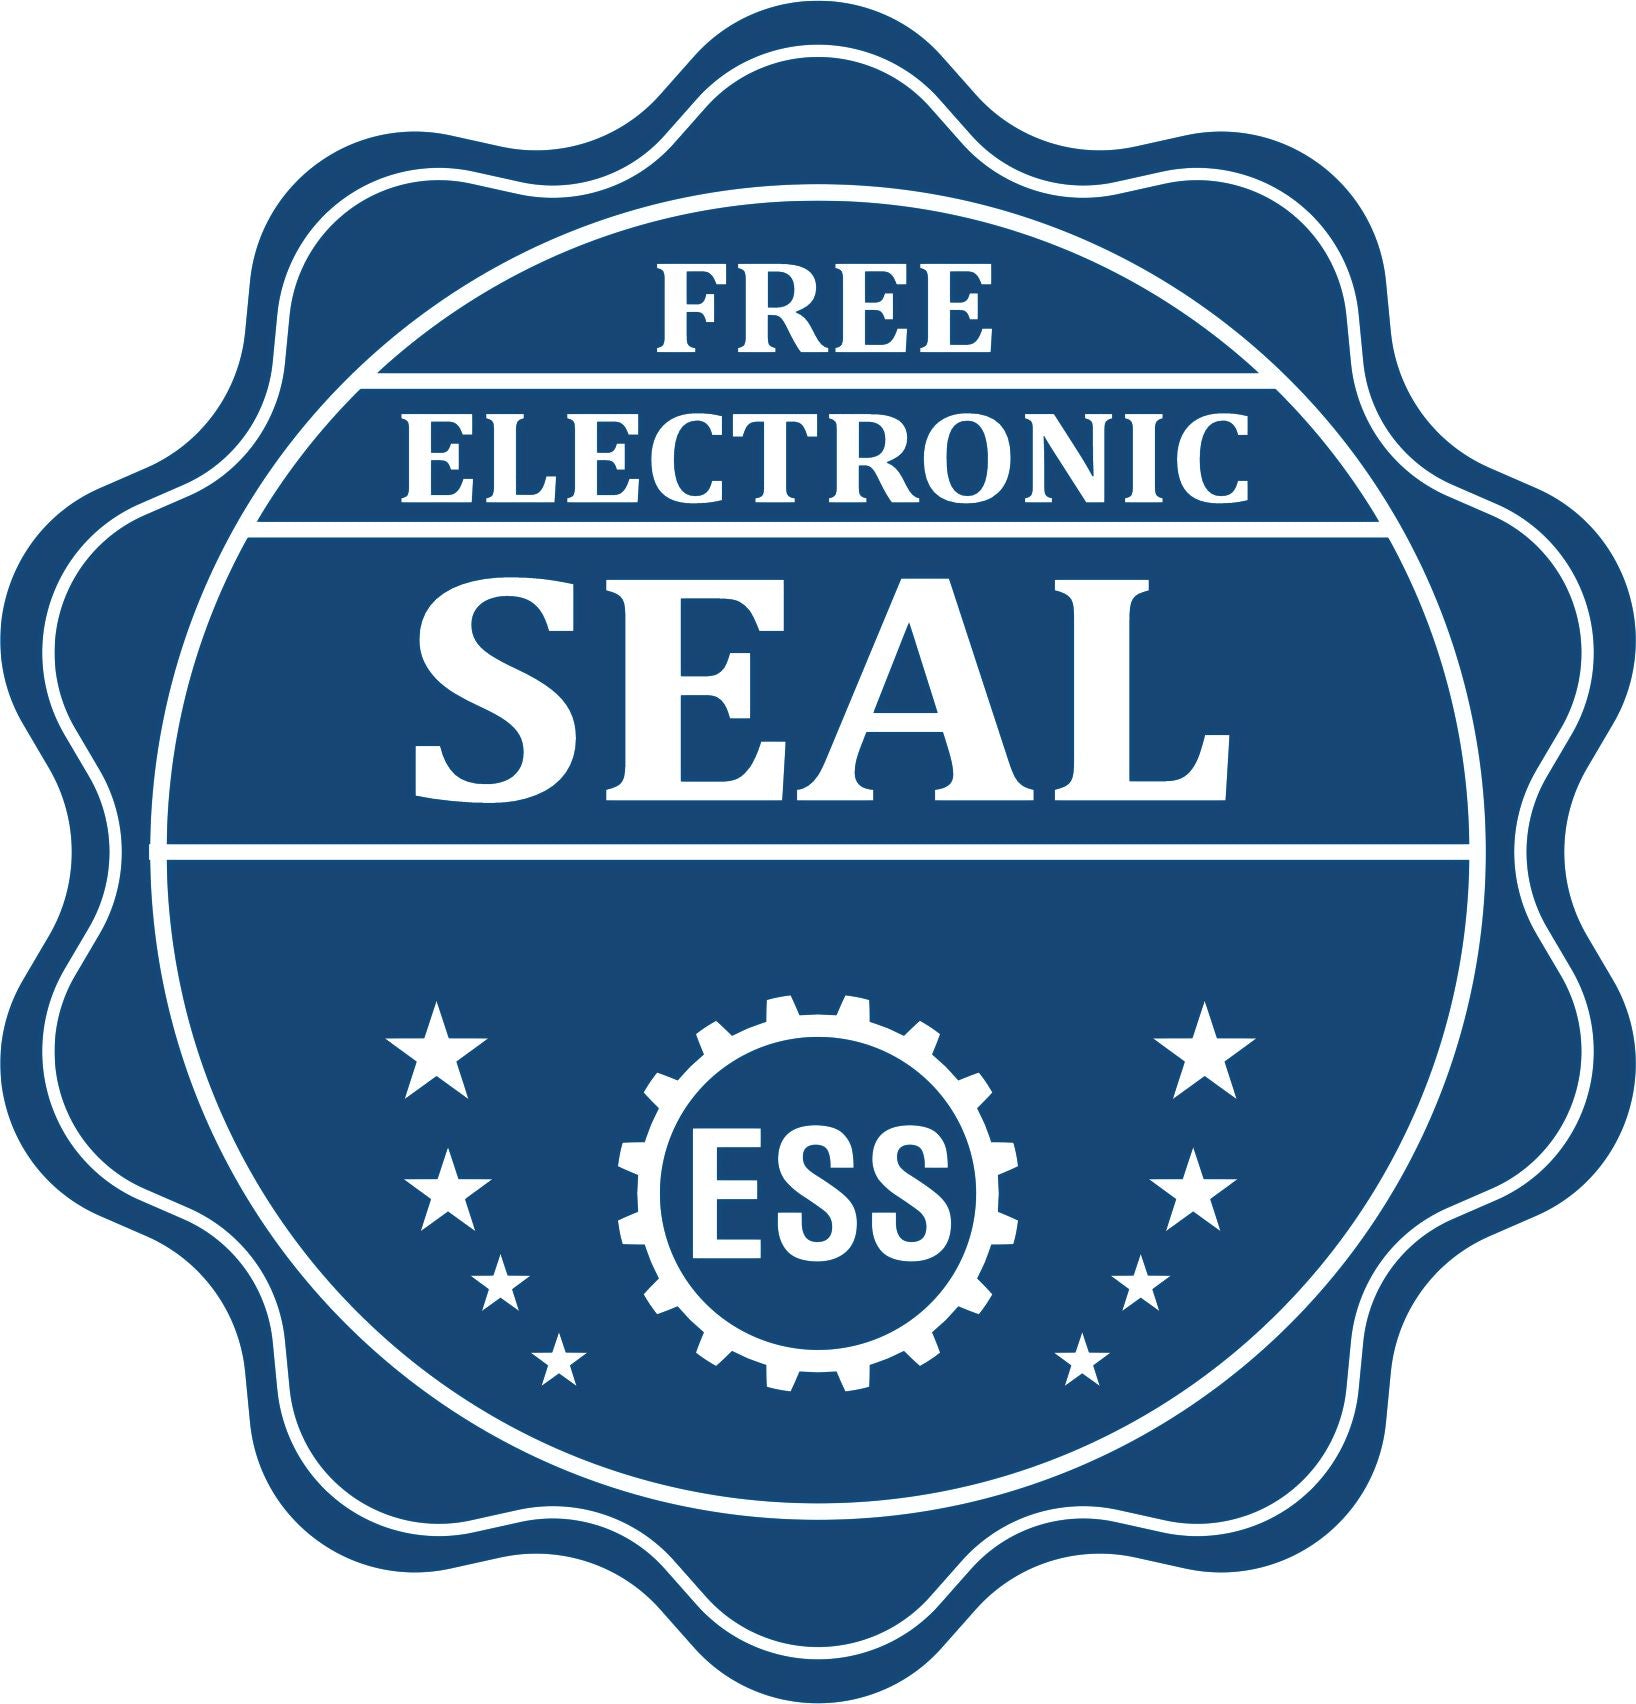 A badge showing a free electronic seal for the Heavy Duty Cast Iron South Dakota Architect Embosser with stars and the ESS gear on the emblem.